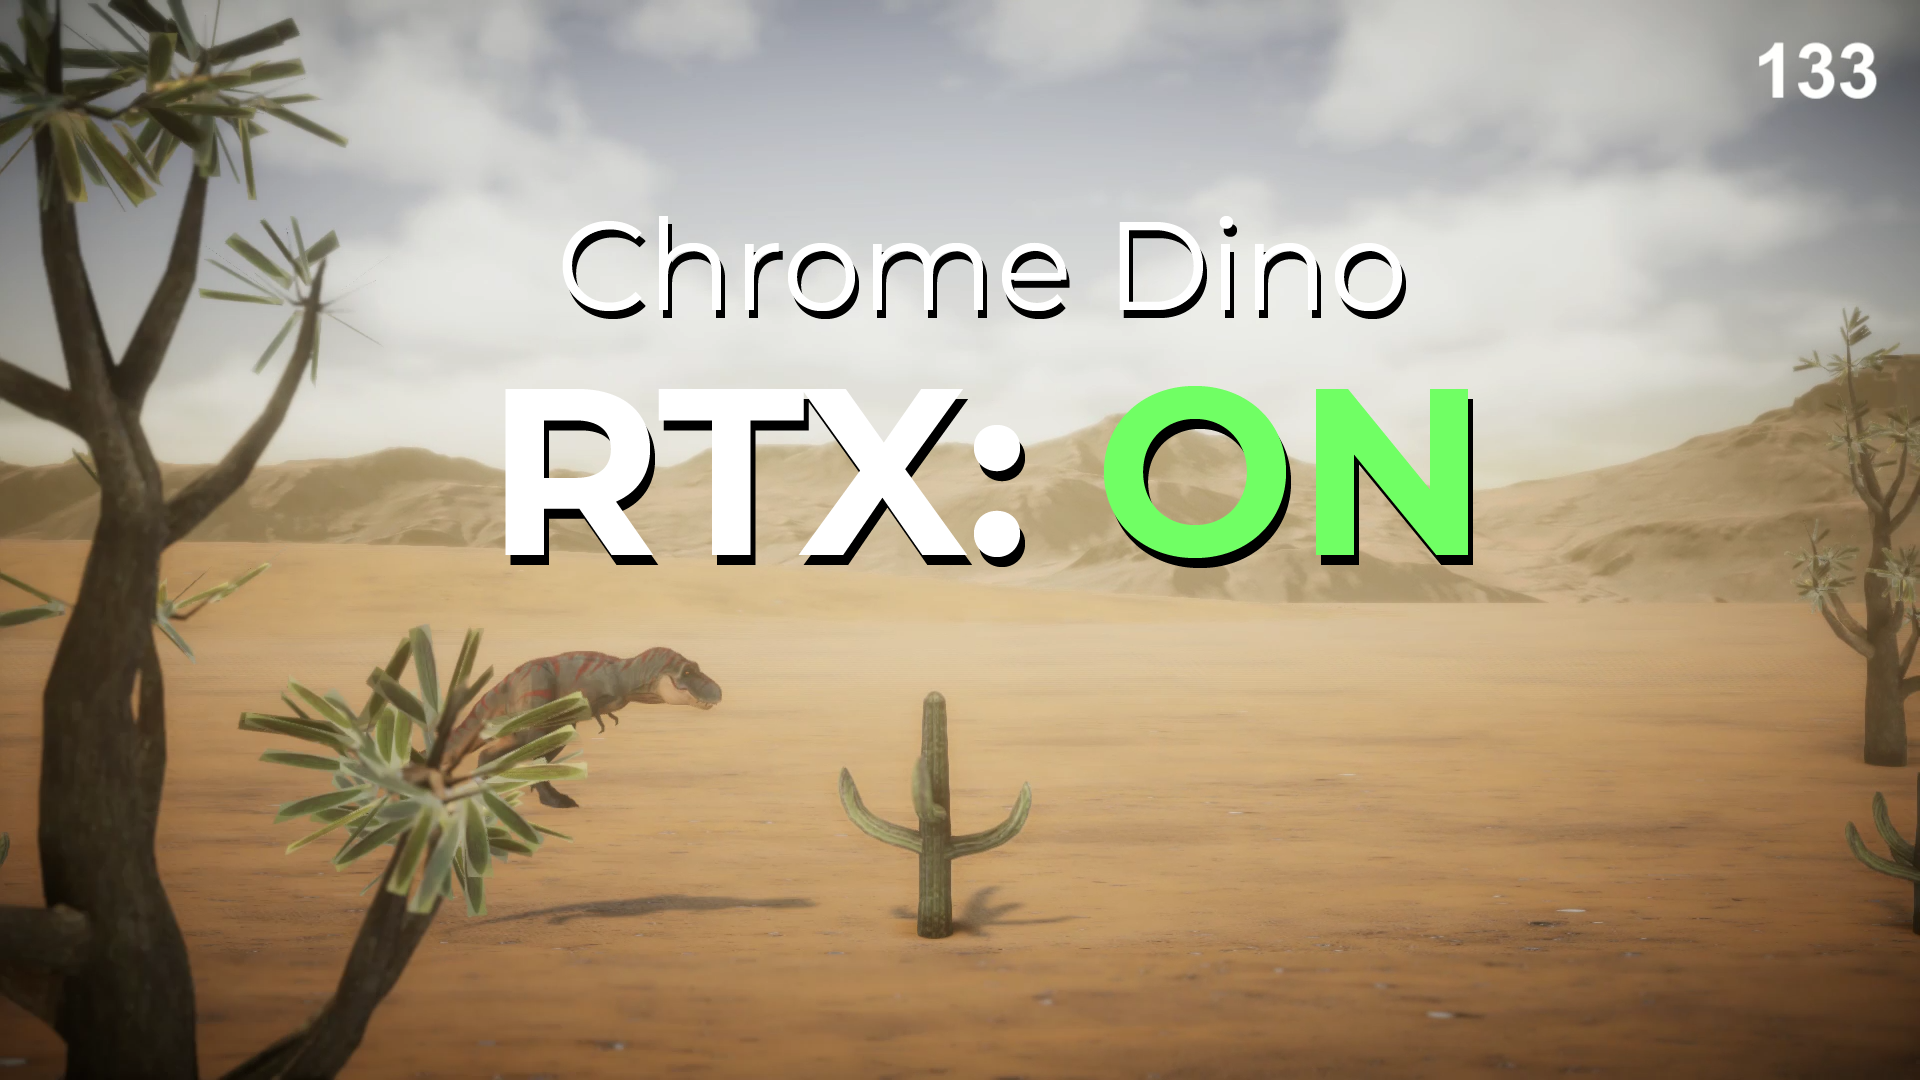 Chrome Dino but RTX is ON by Lạc Studio